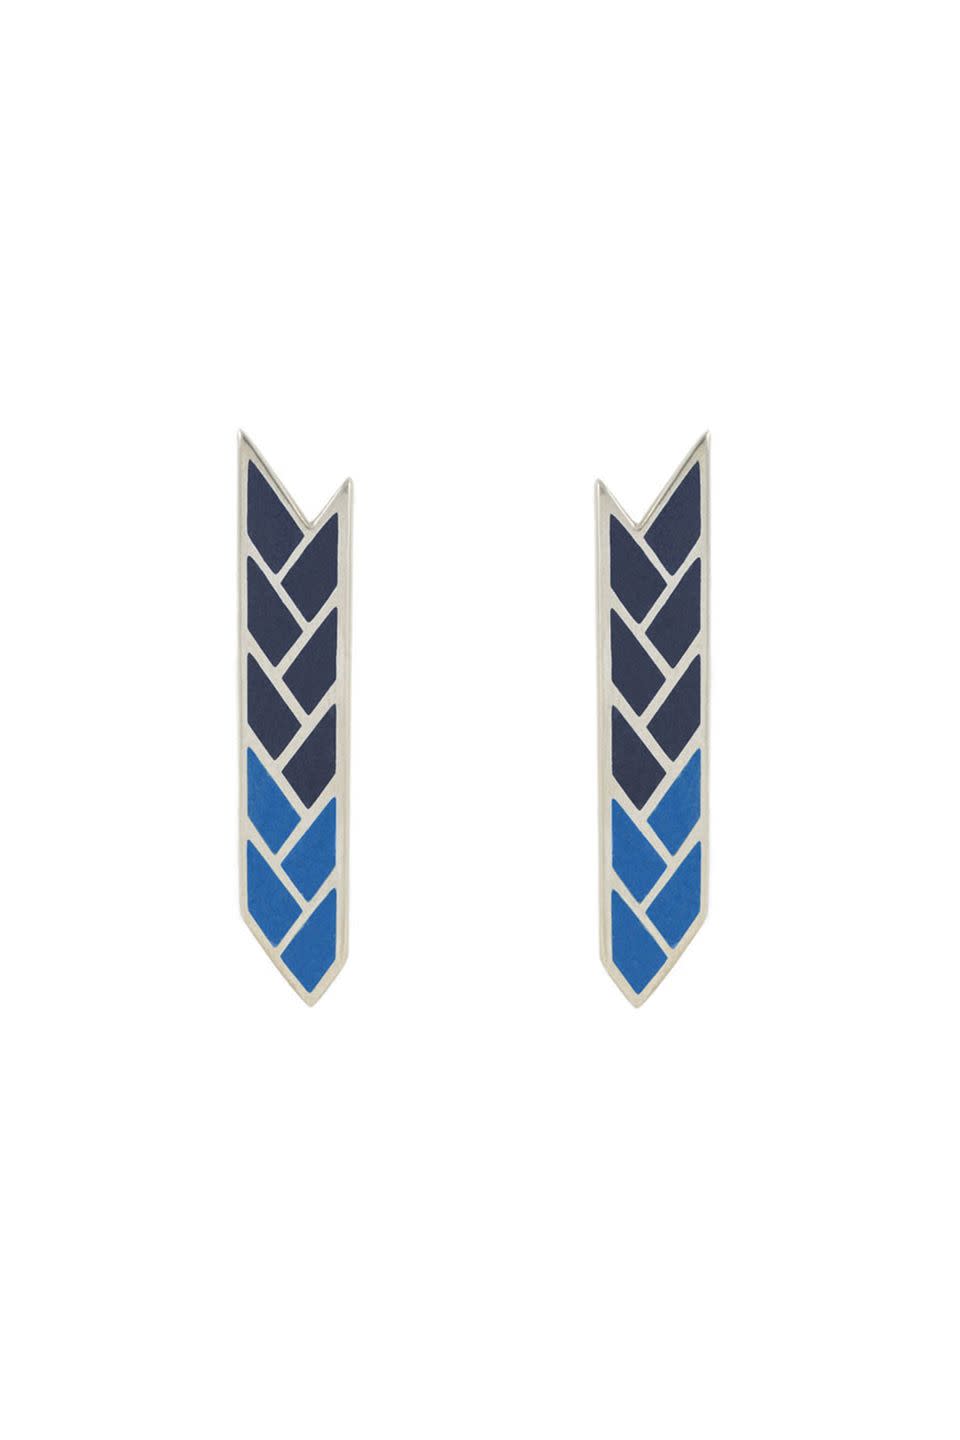 12 Pieces That Will Jumpstart an Enamel Jewelry Obsession